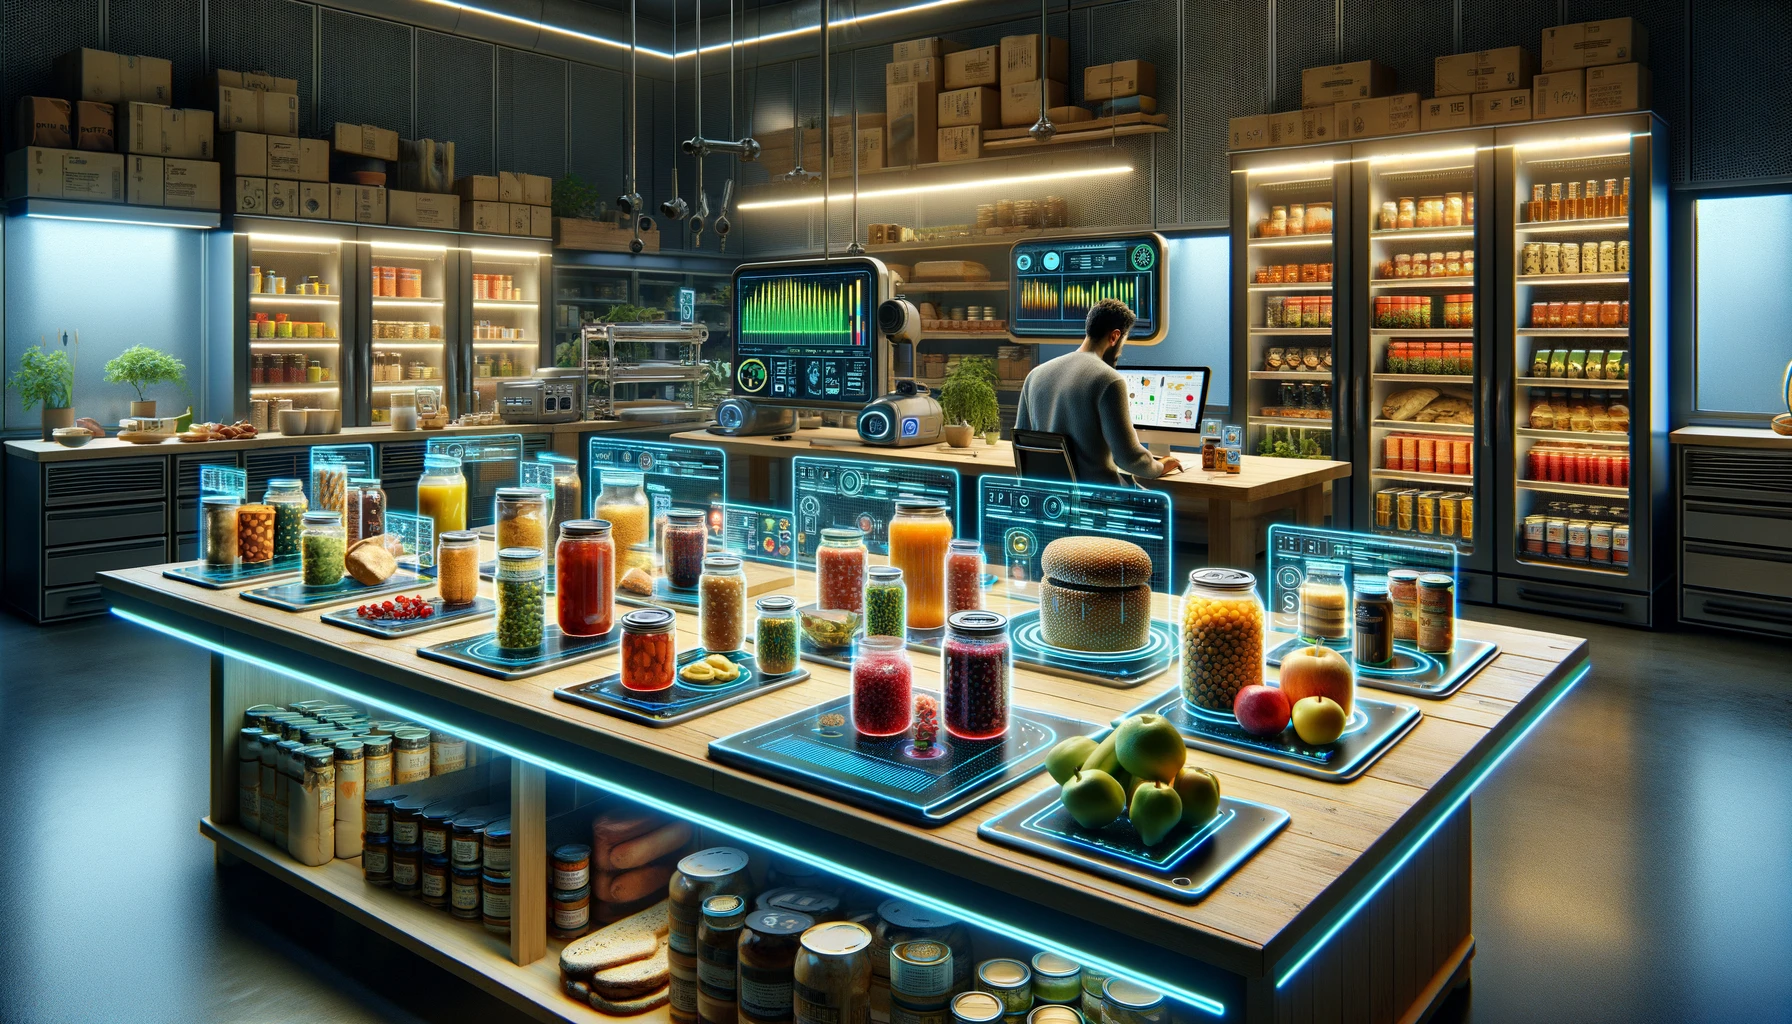 Ultra-modern kitchen with a high-tech interactive display table examining stored food items for spoilage, highlighted by smart sensors indicating spoilage signs. Background features advanced food preservation technology, emphasizing a commitment to food safety, waste prevention, and sustainability